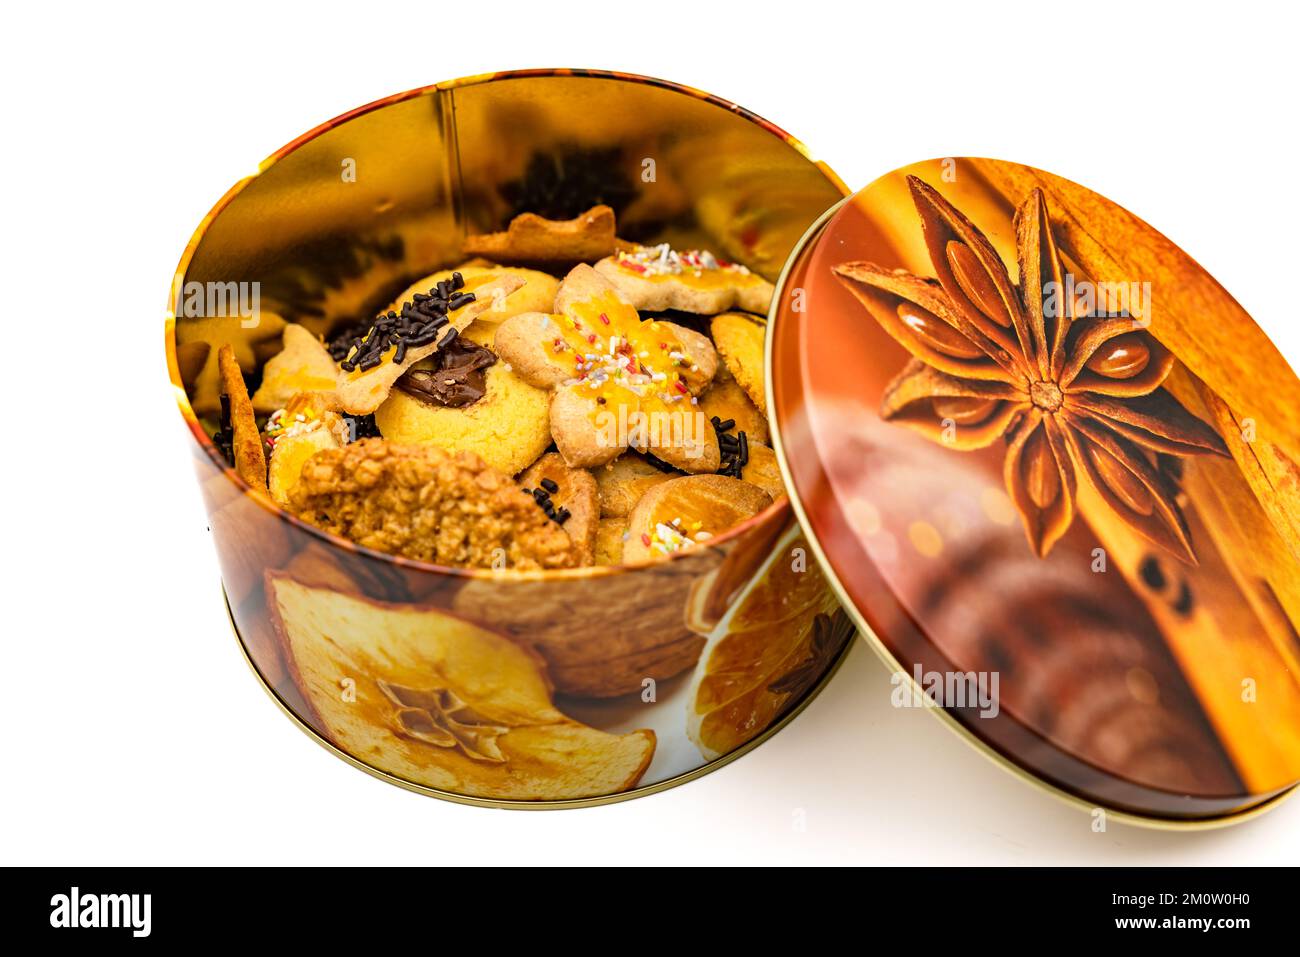 A colorfully painted tin with golden baked biscuits, small baked goods and cookies for the Advent season Stock Photo